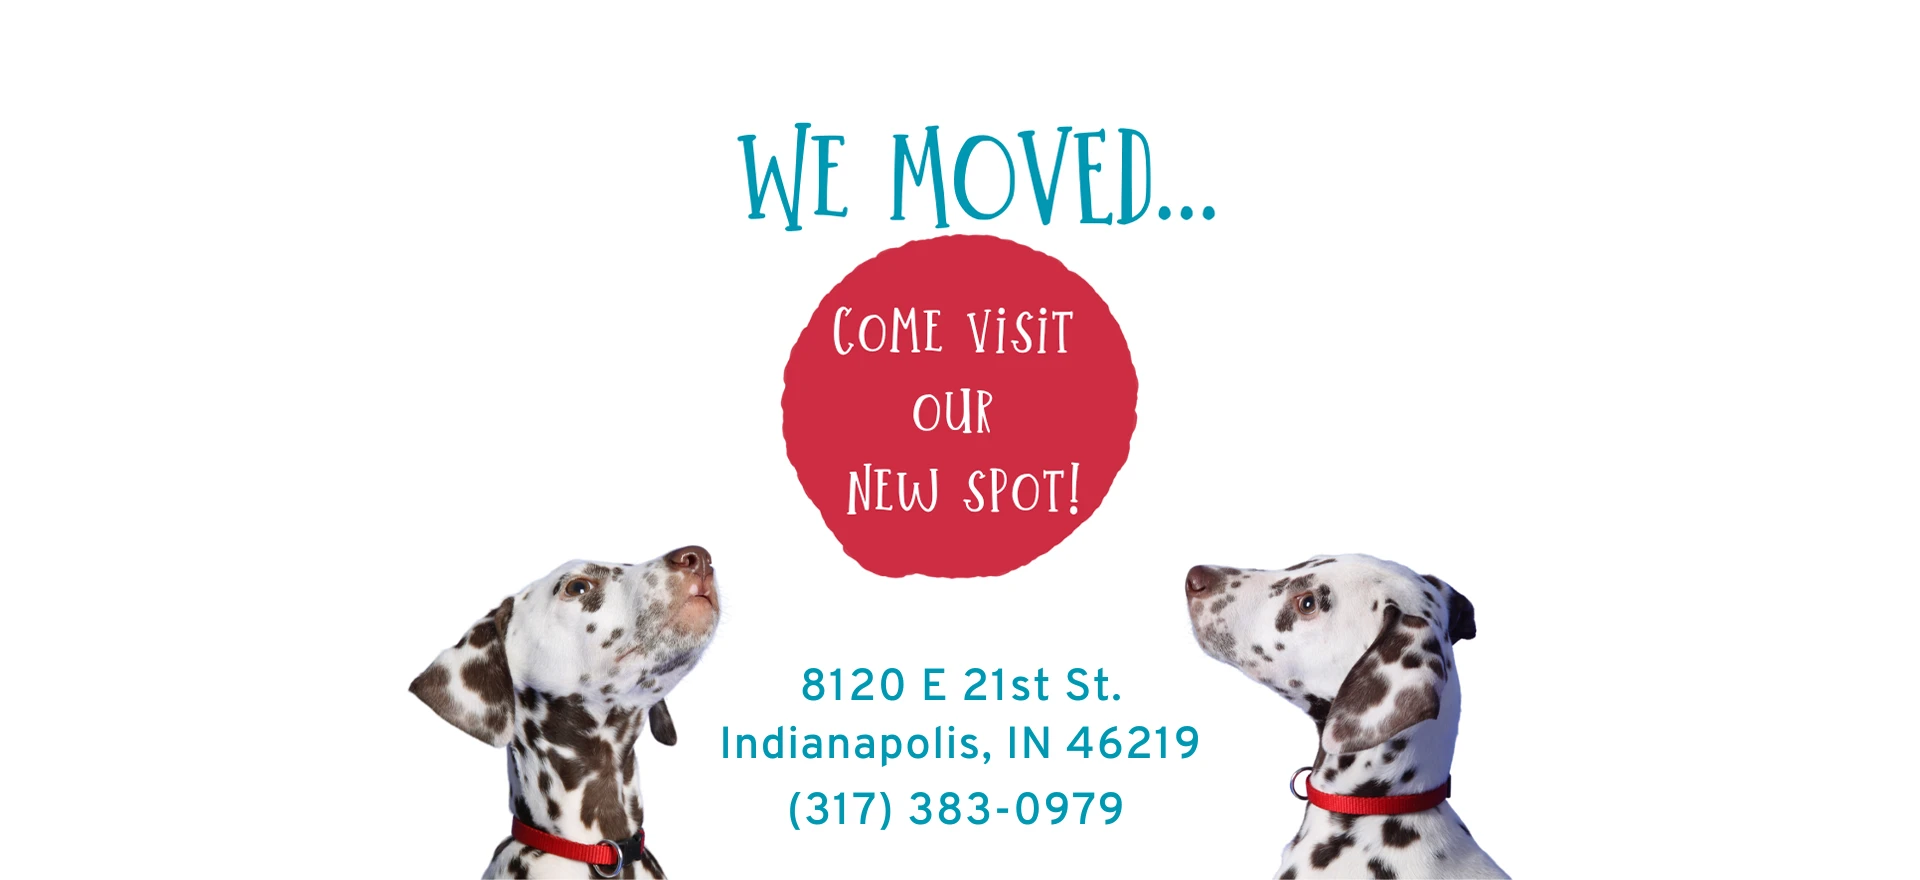 We moved! Come visit out new spot!